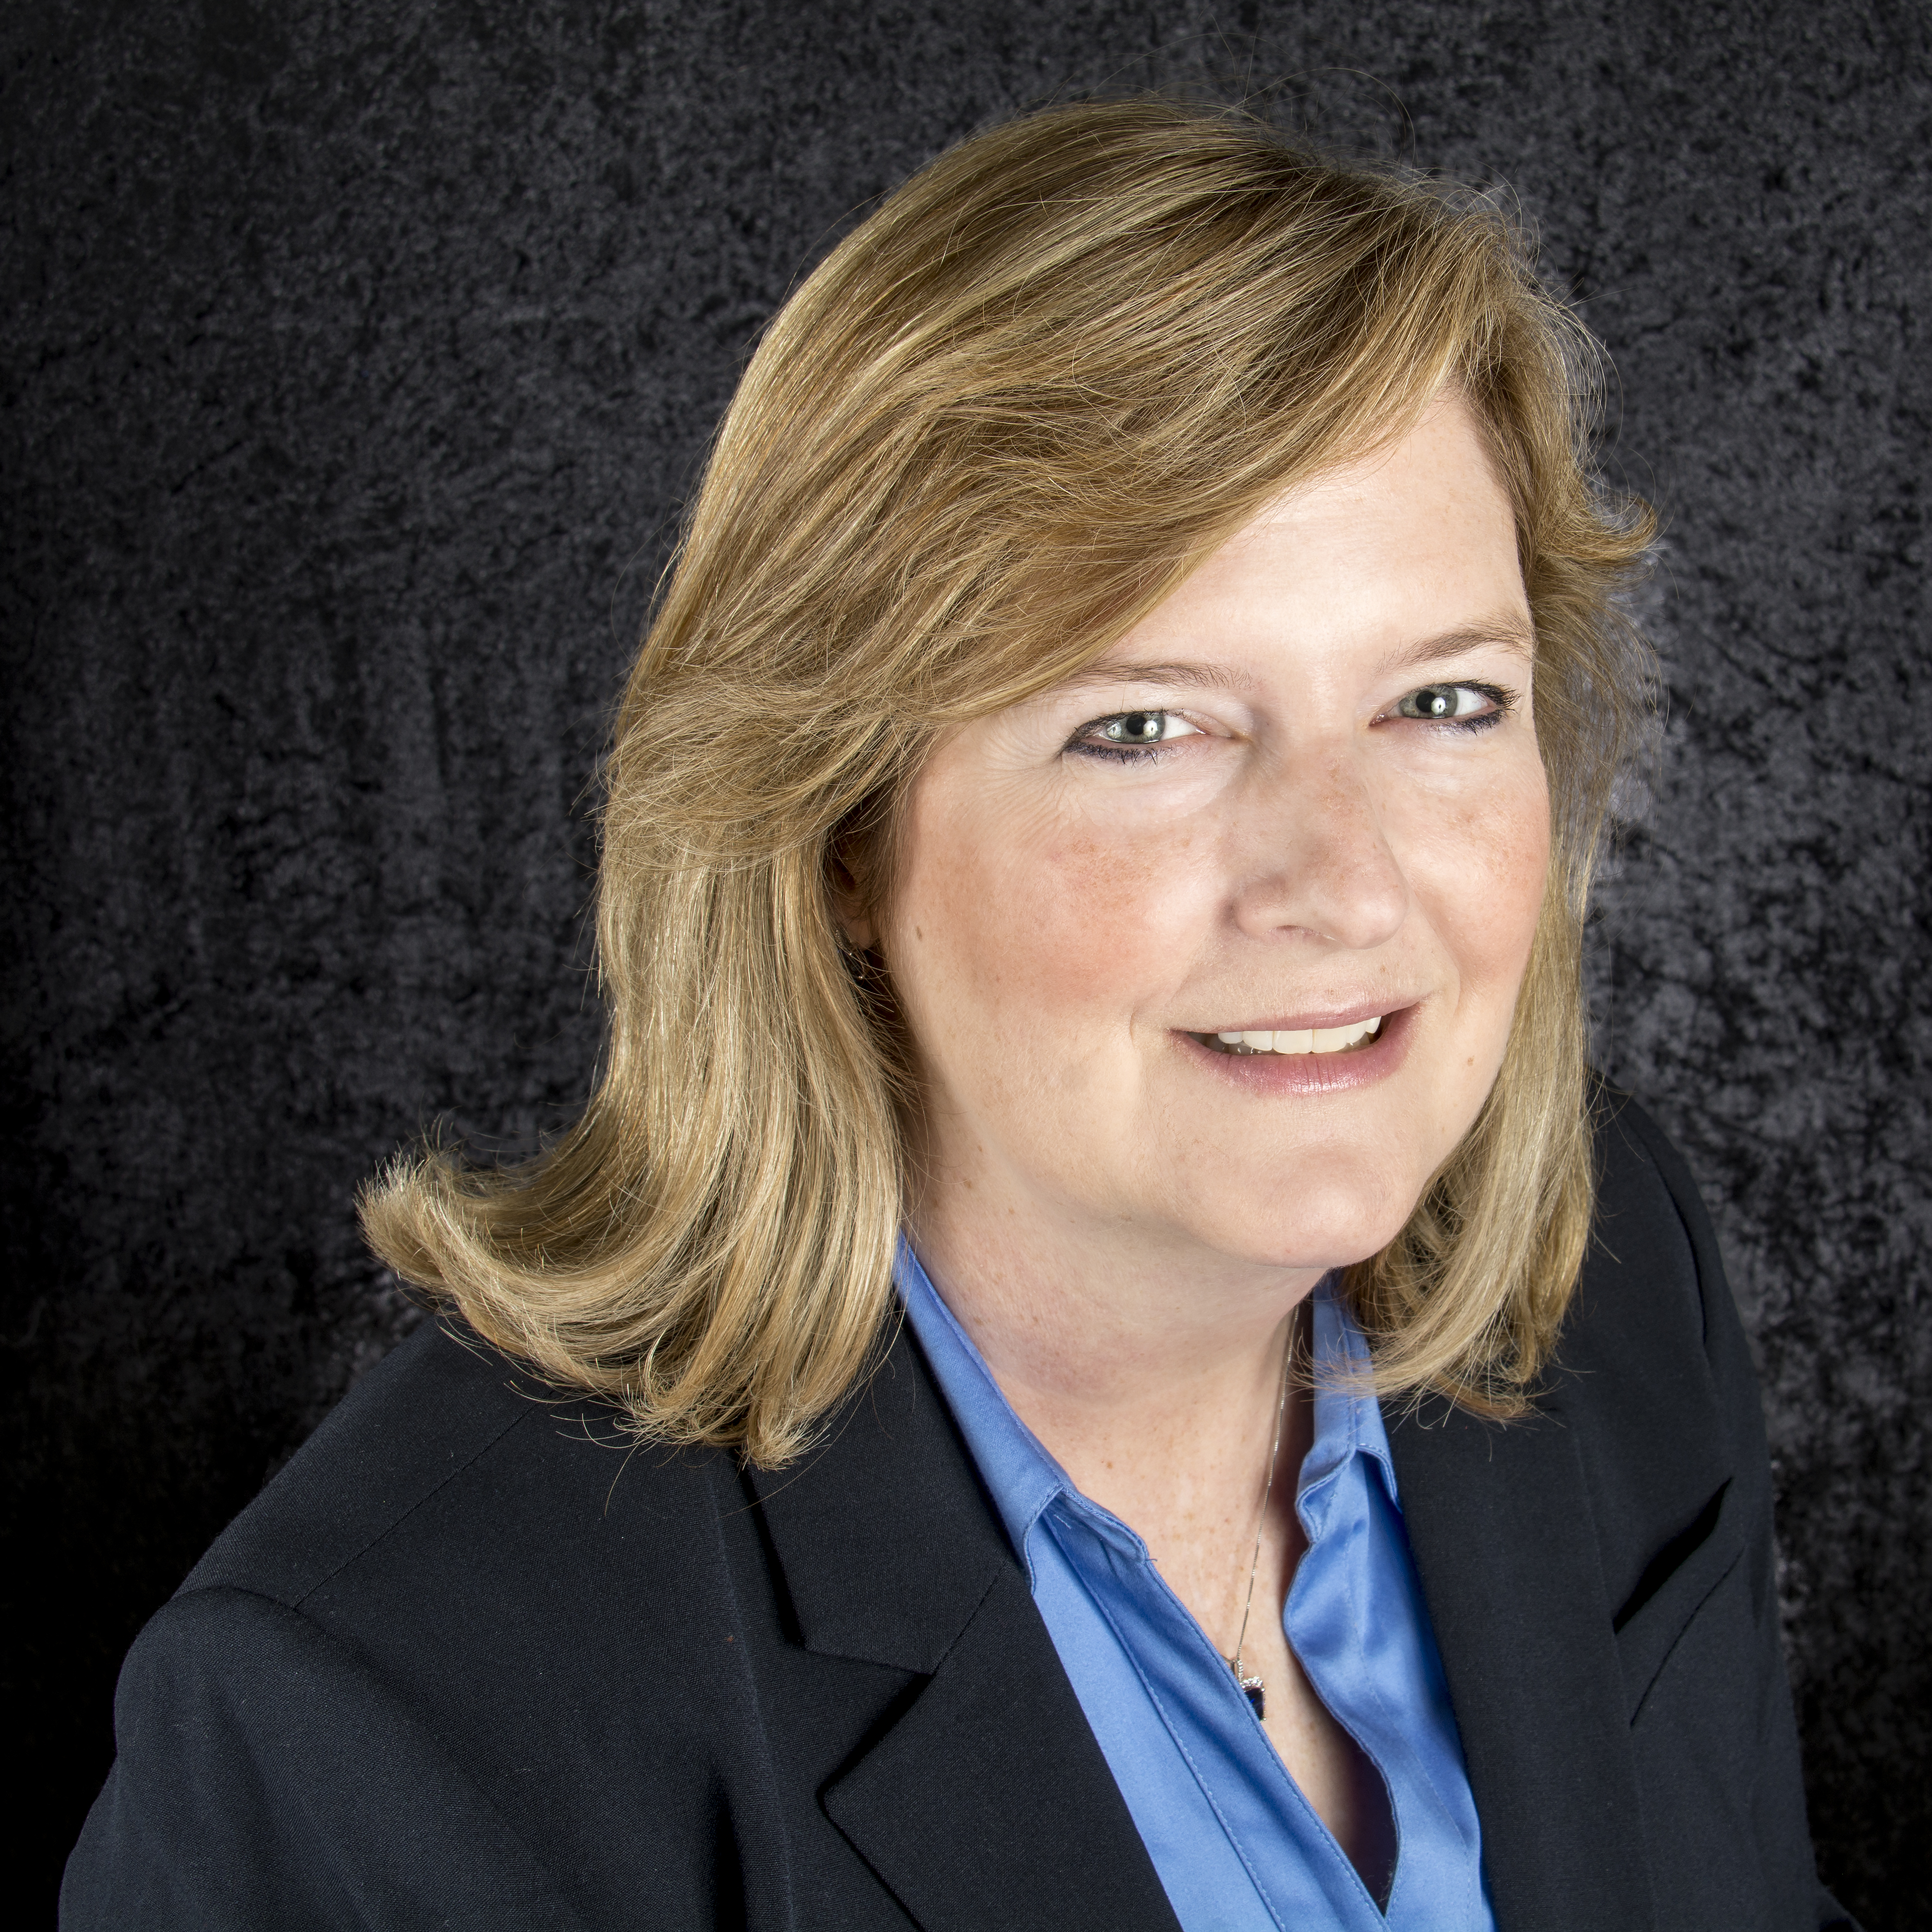 ACES Risk Management (ARMCO) has announced that former Director of Client Services Sharon Reichhardt has been promoted to Vice President of Client Success